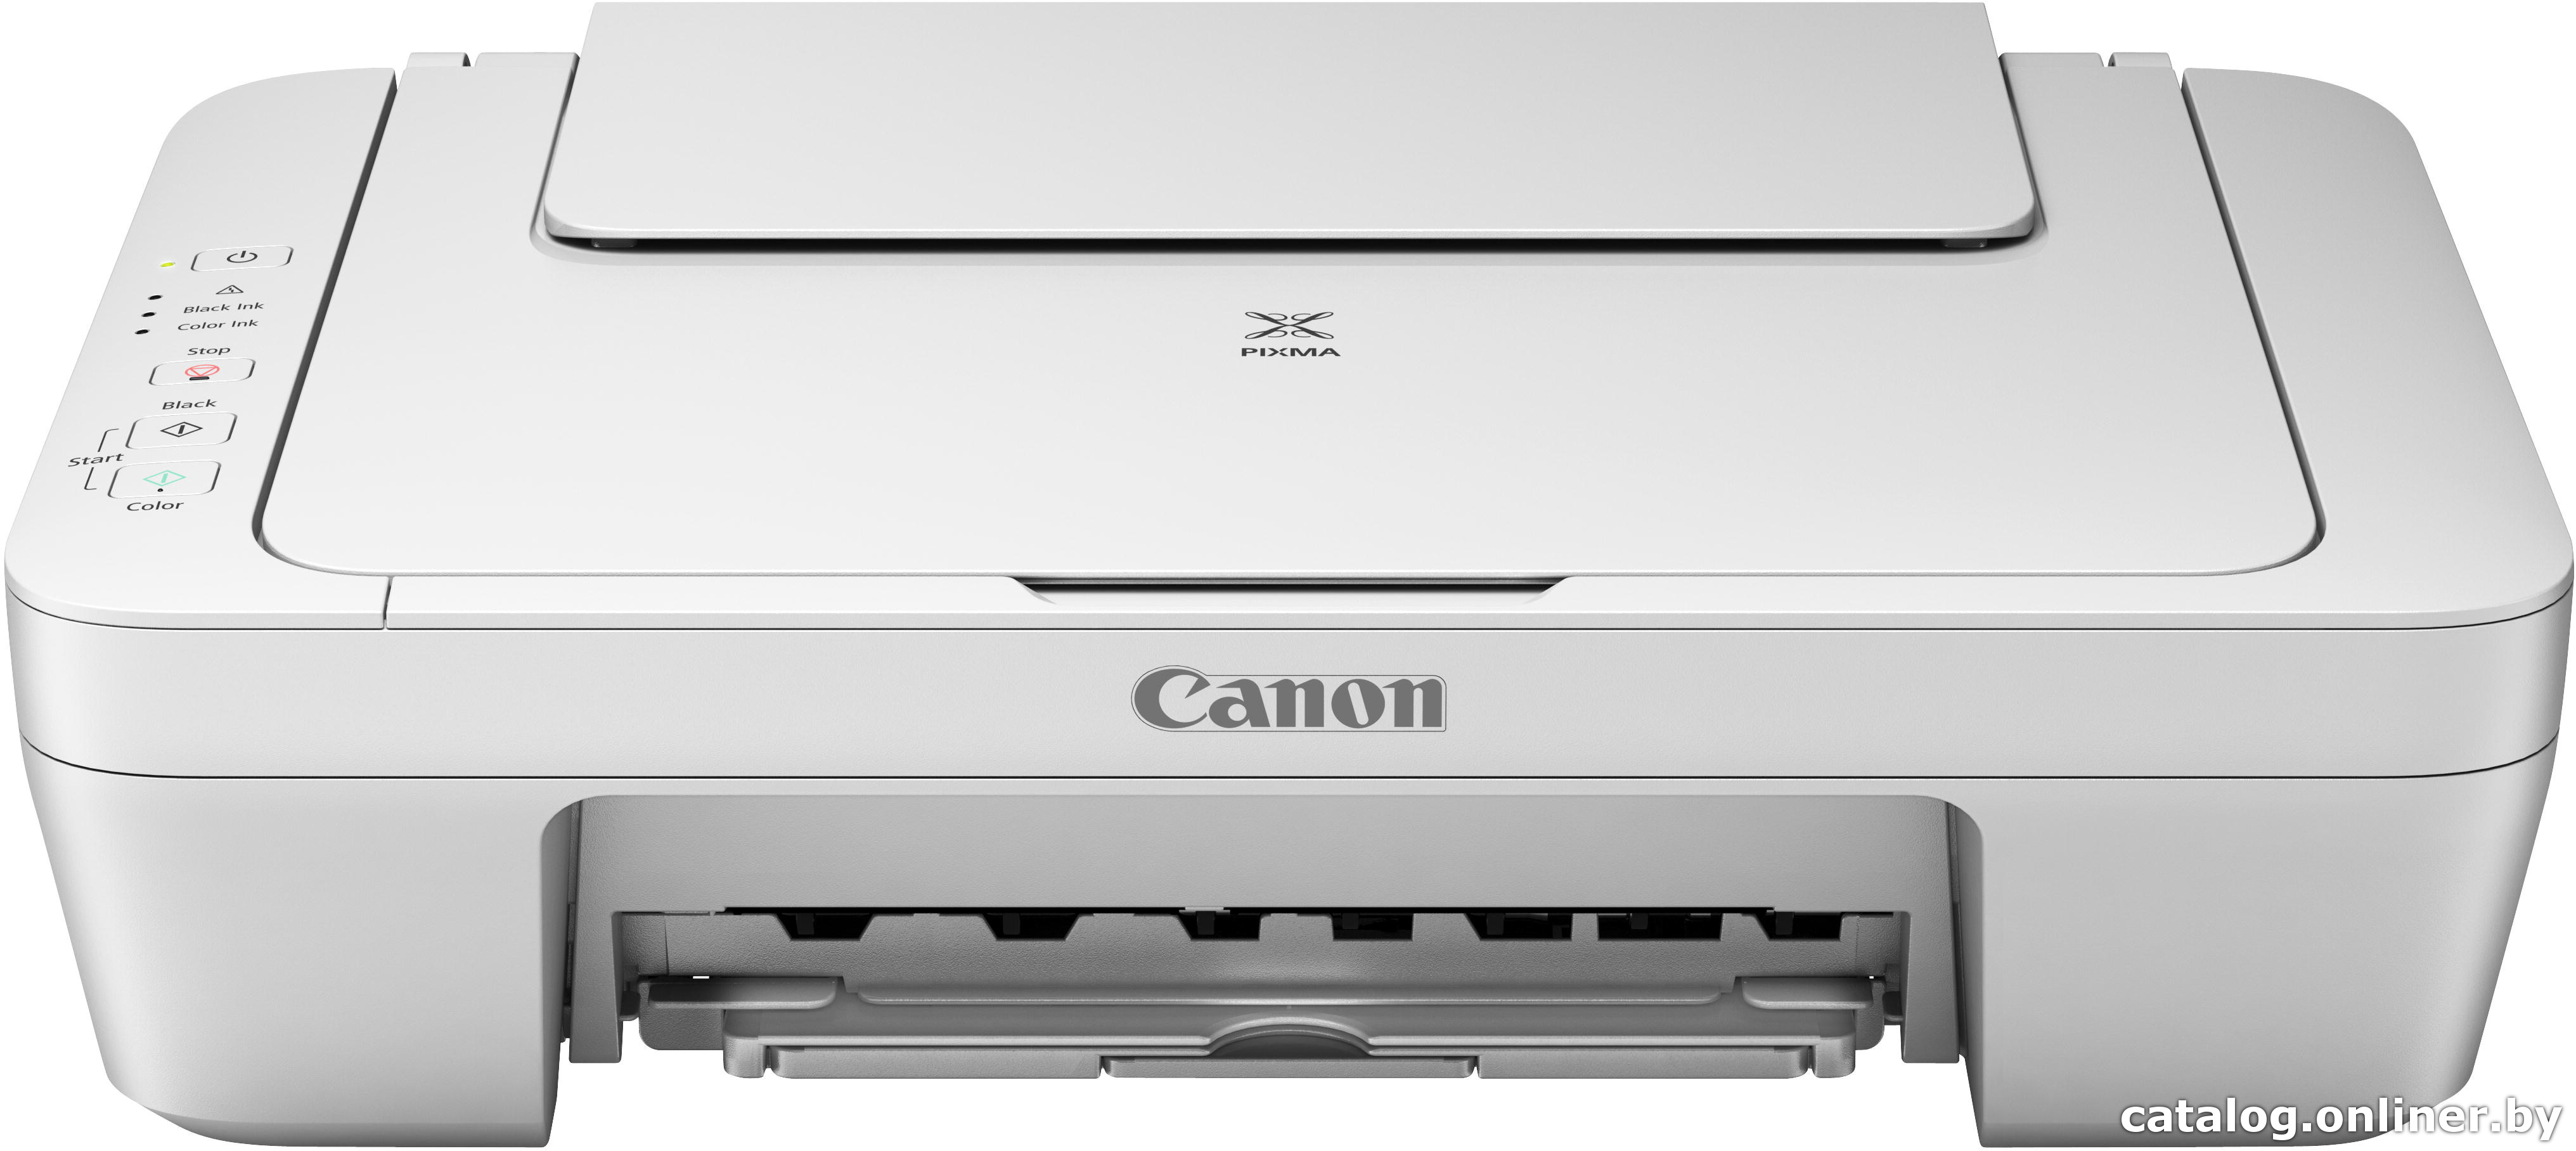 Canon MG2450 Scanner Driver Mac Sierra 10.12 How to Download and Install - Featured